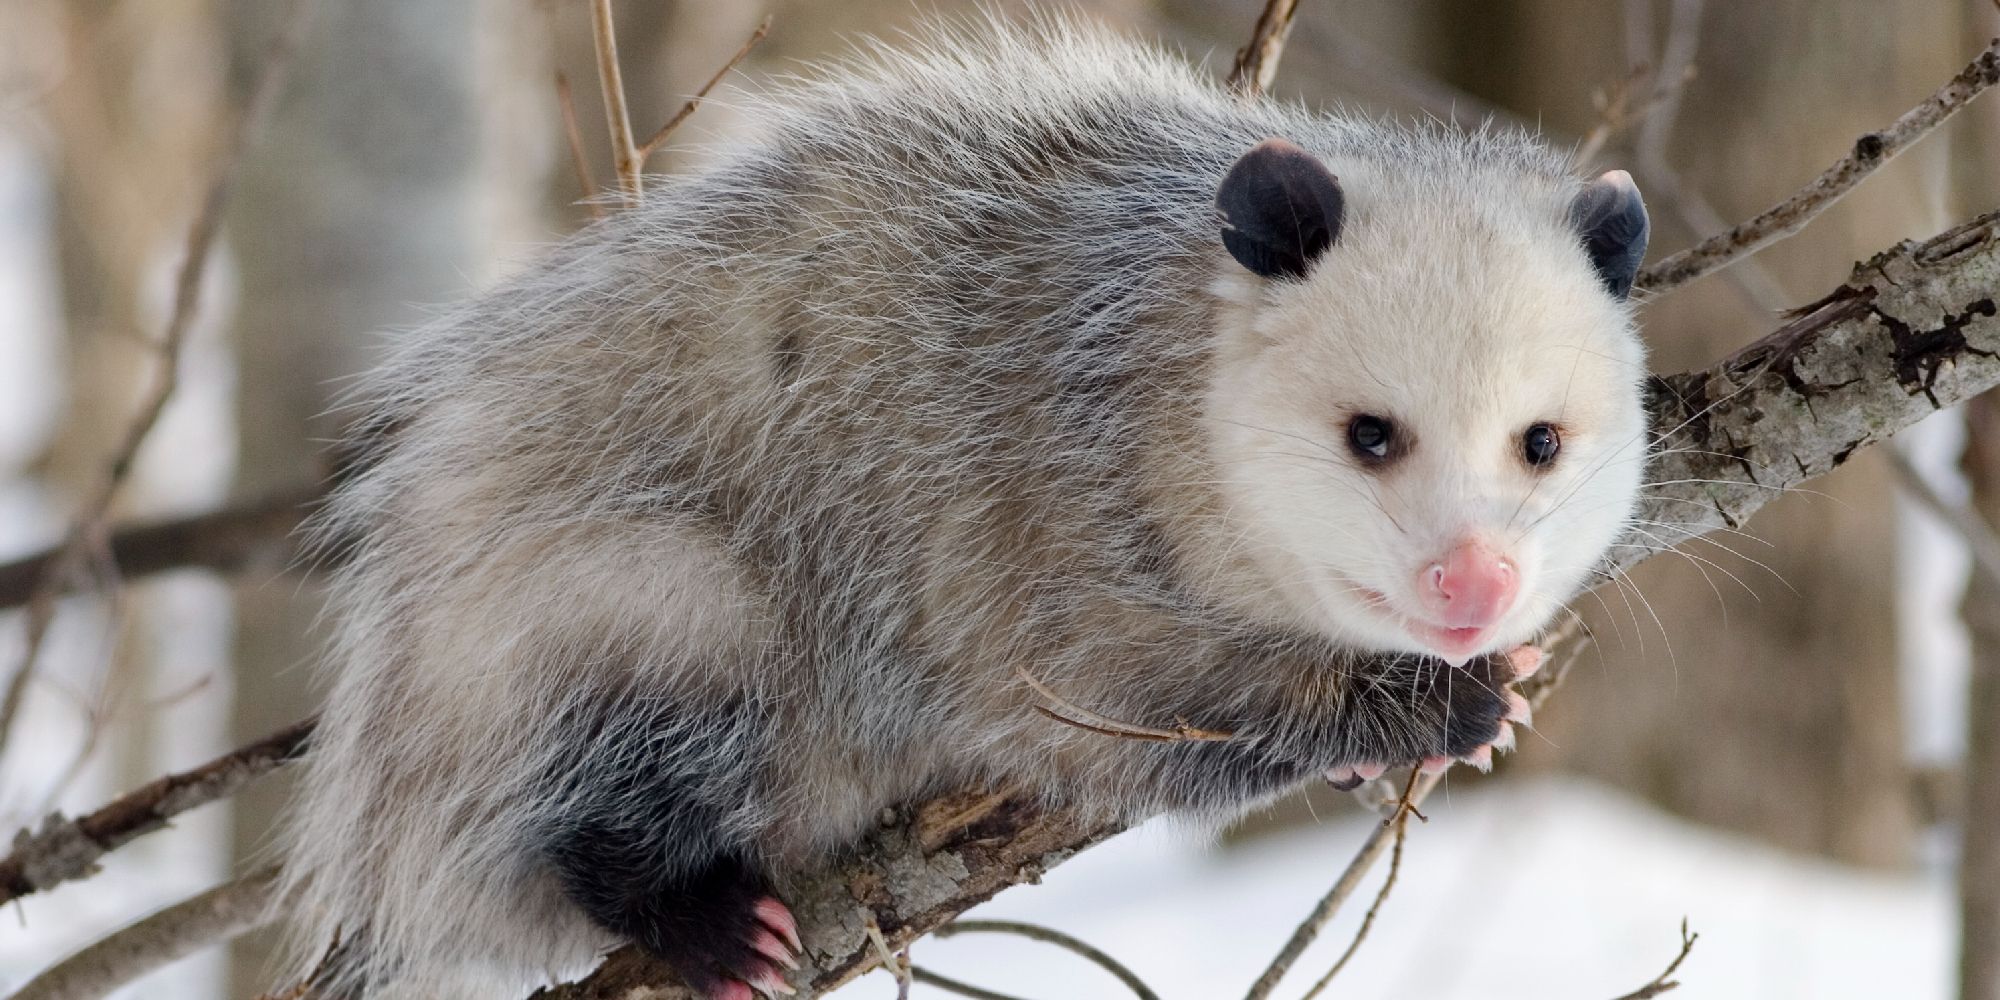 An opossum sitting on a tree branch in the snow